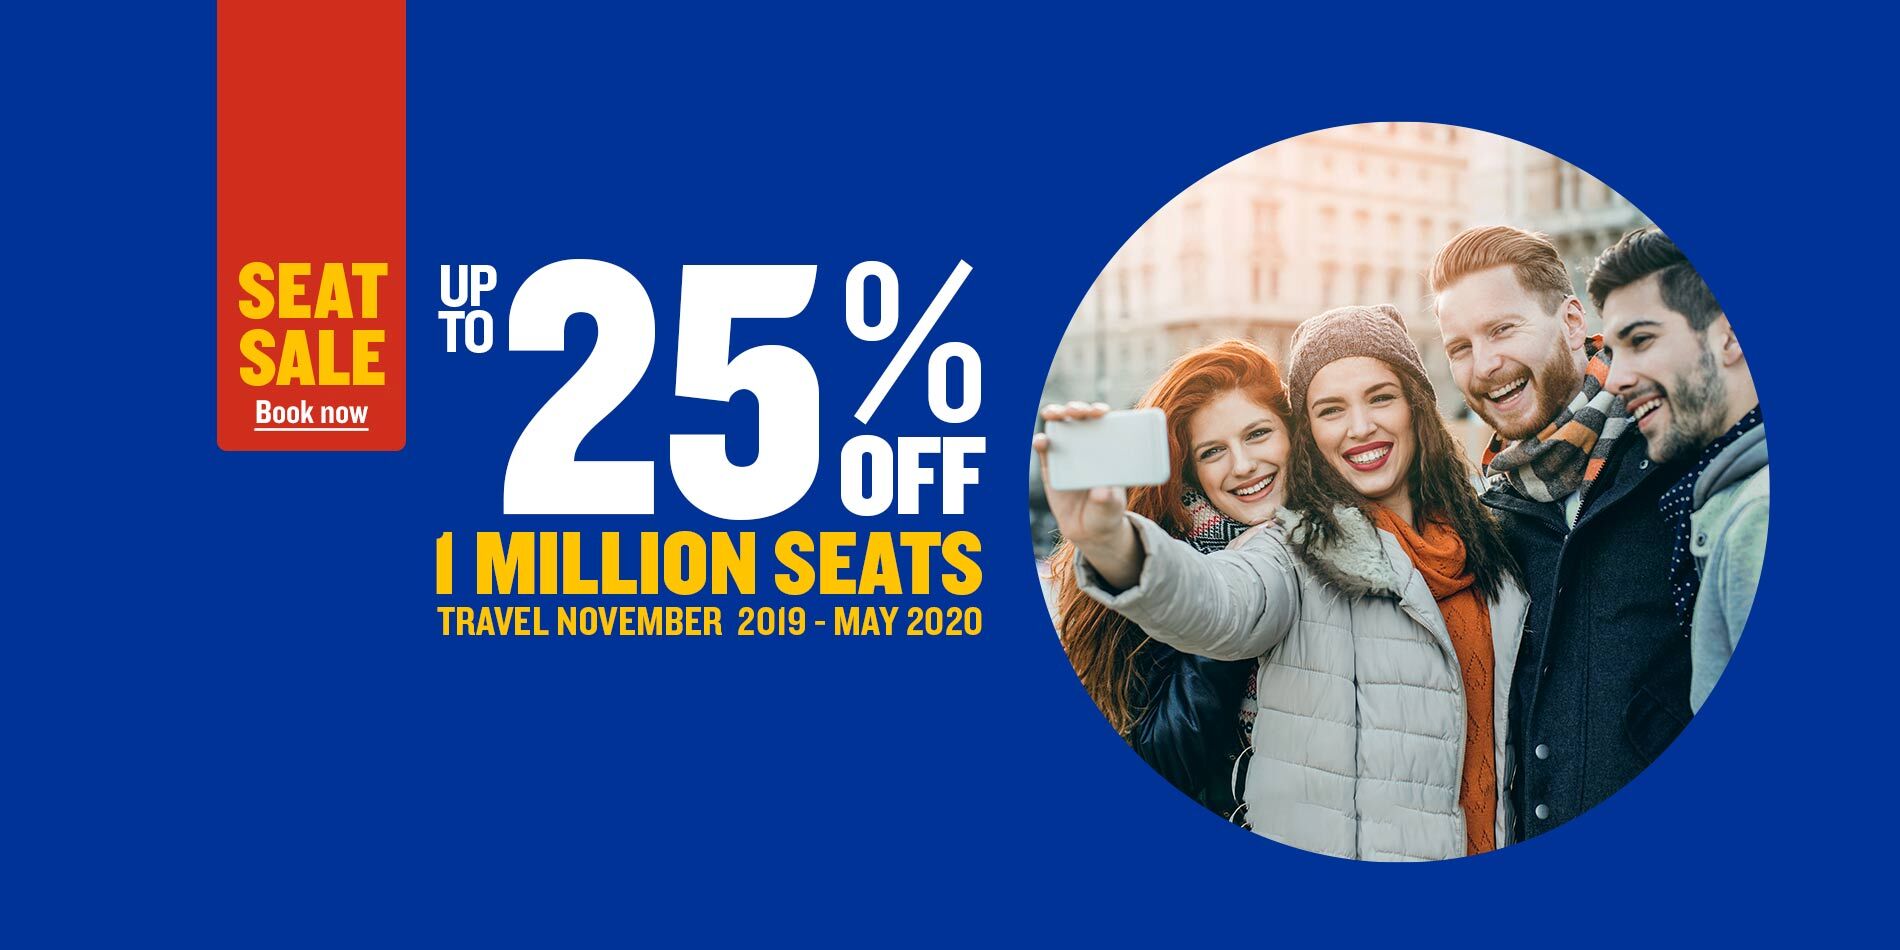 Ryanair Launches “Awesome Autumn” Seat Sale, 25% Off 1 Million Seats Between November And May 2020